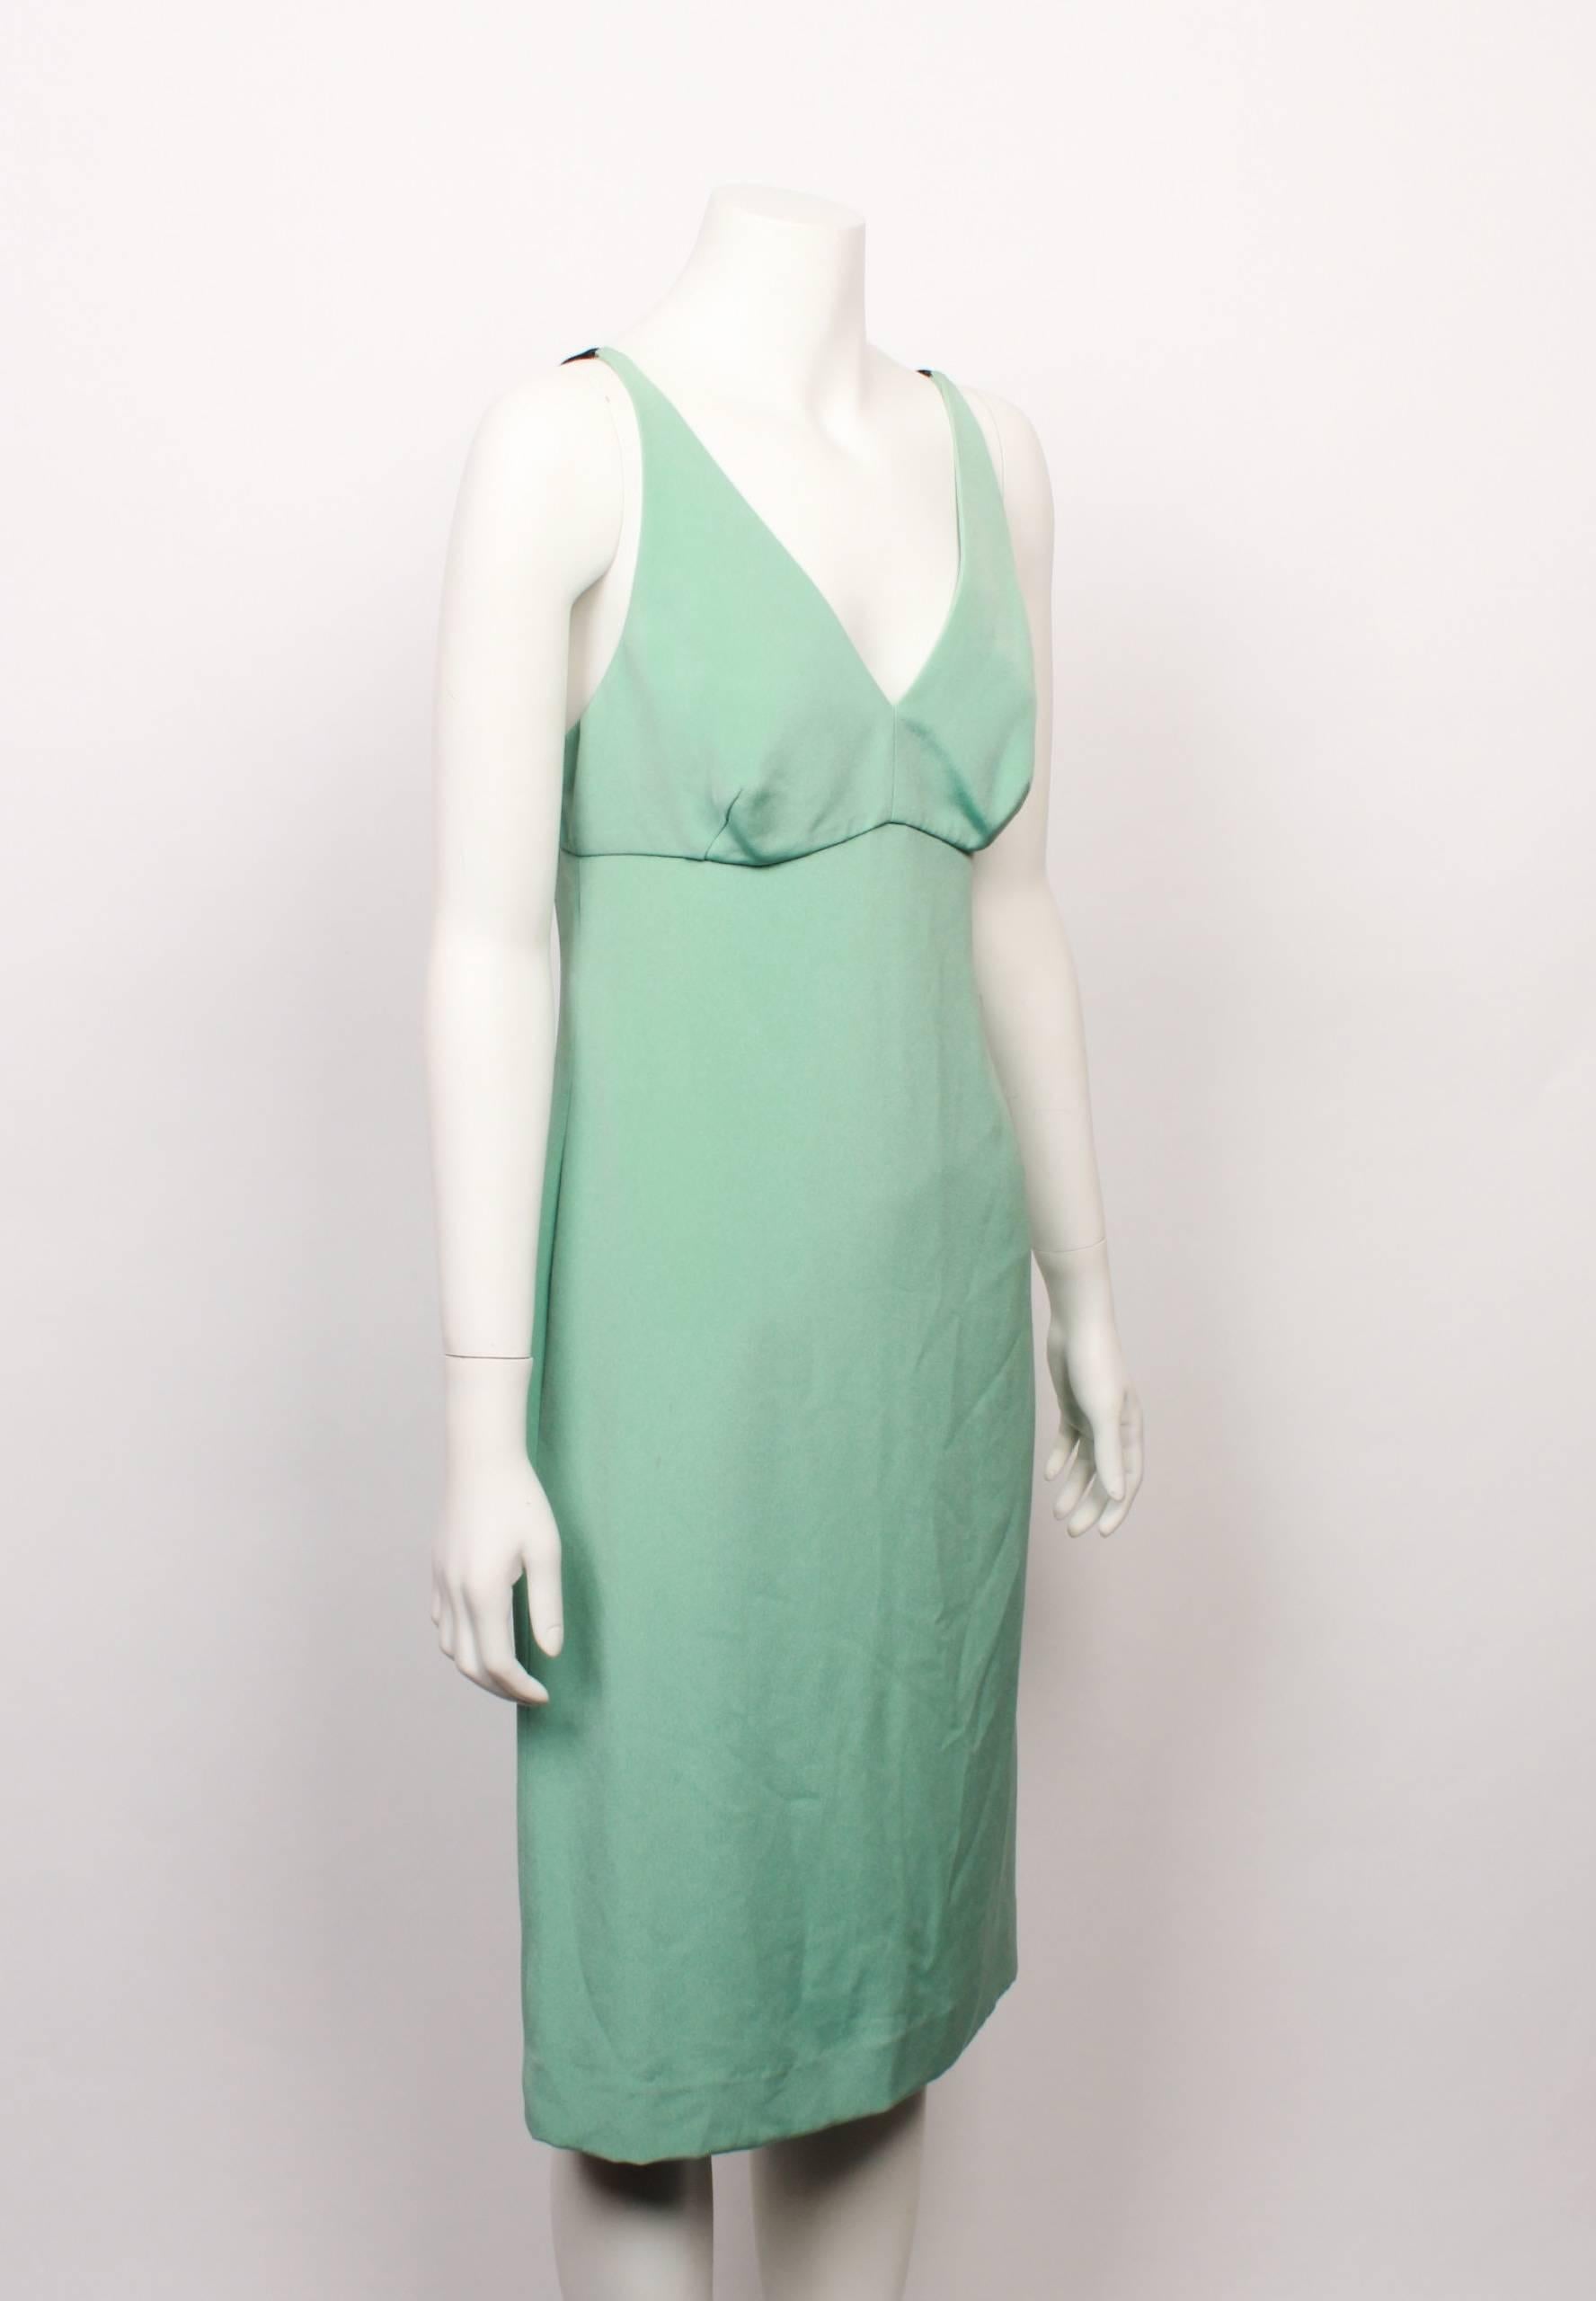 Classic Dolce & Gabbana spearmint green 100% silk slip dress with adjustable black underwear style straps. Back invisible zip closure and hook and eye fastening. Made in Italy. Size 42.
